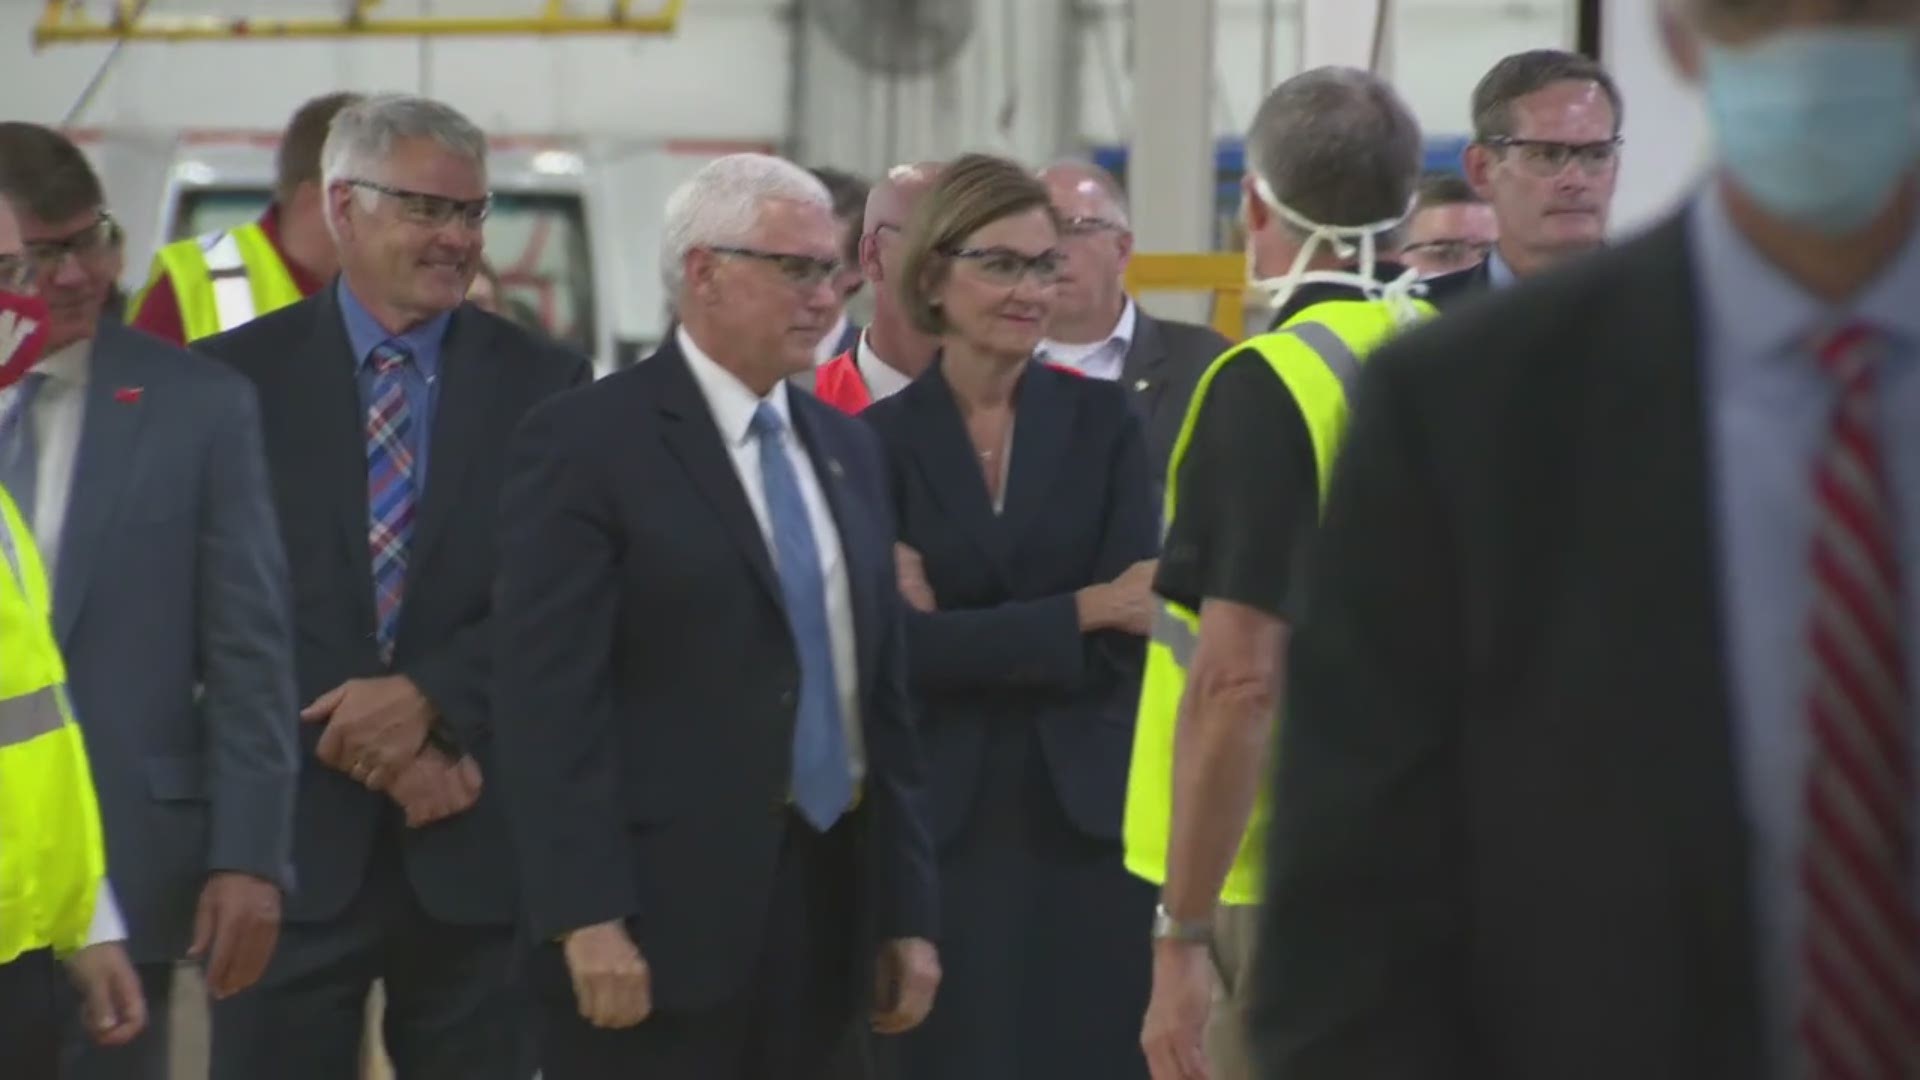 Vice President Mike Pence visited Iowa on June 16, 2020 to tour Winebago Industries in Forest City and deliver remarks titled "Opening Up American Again."